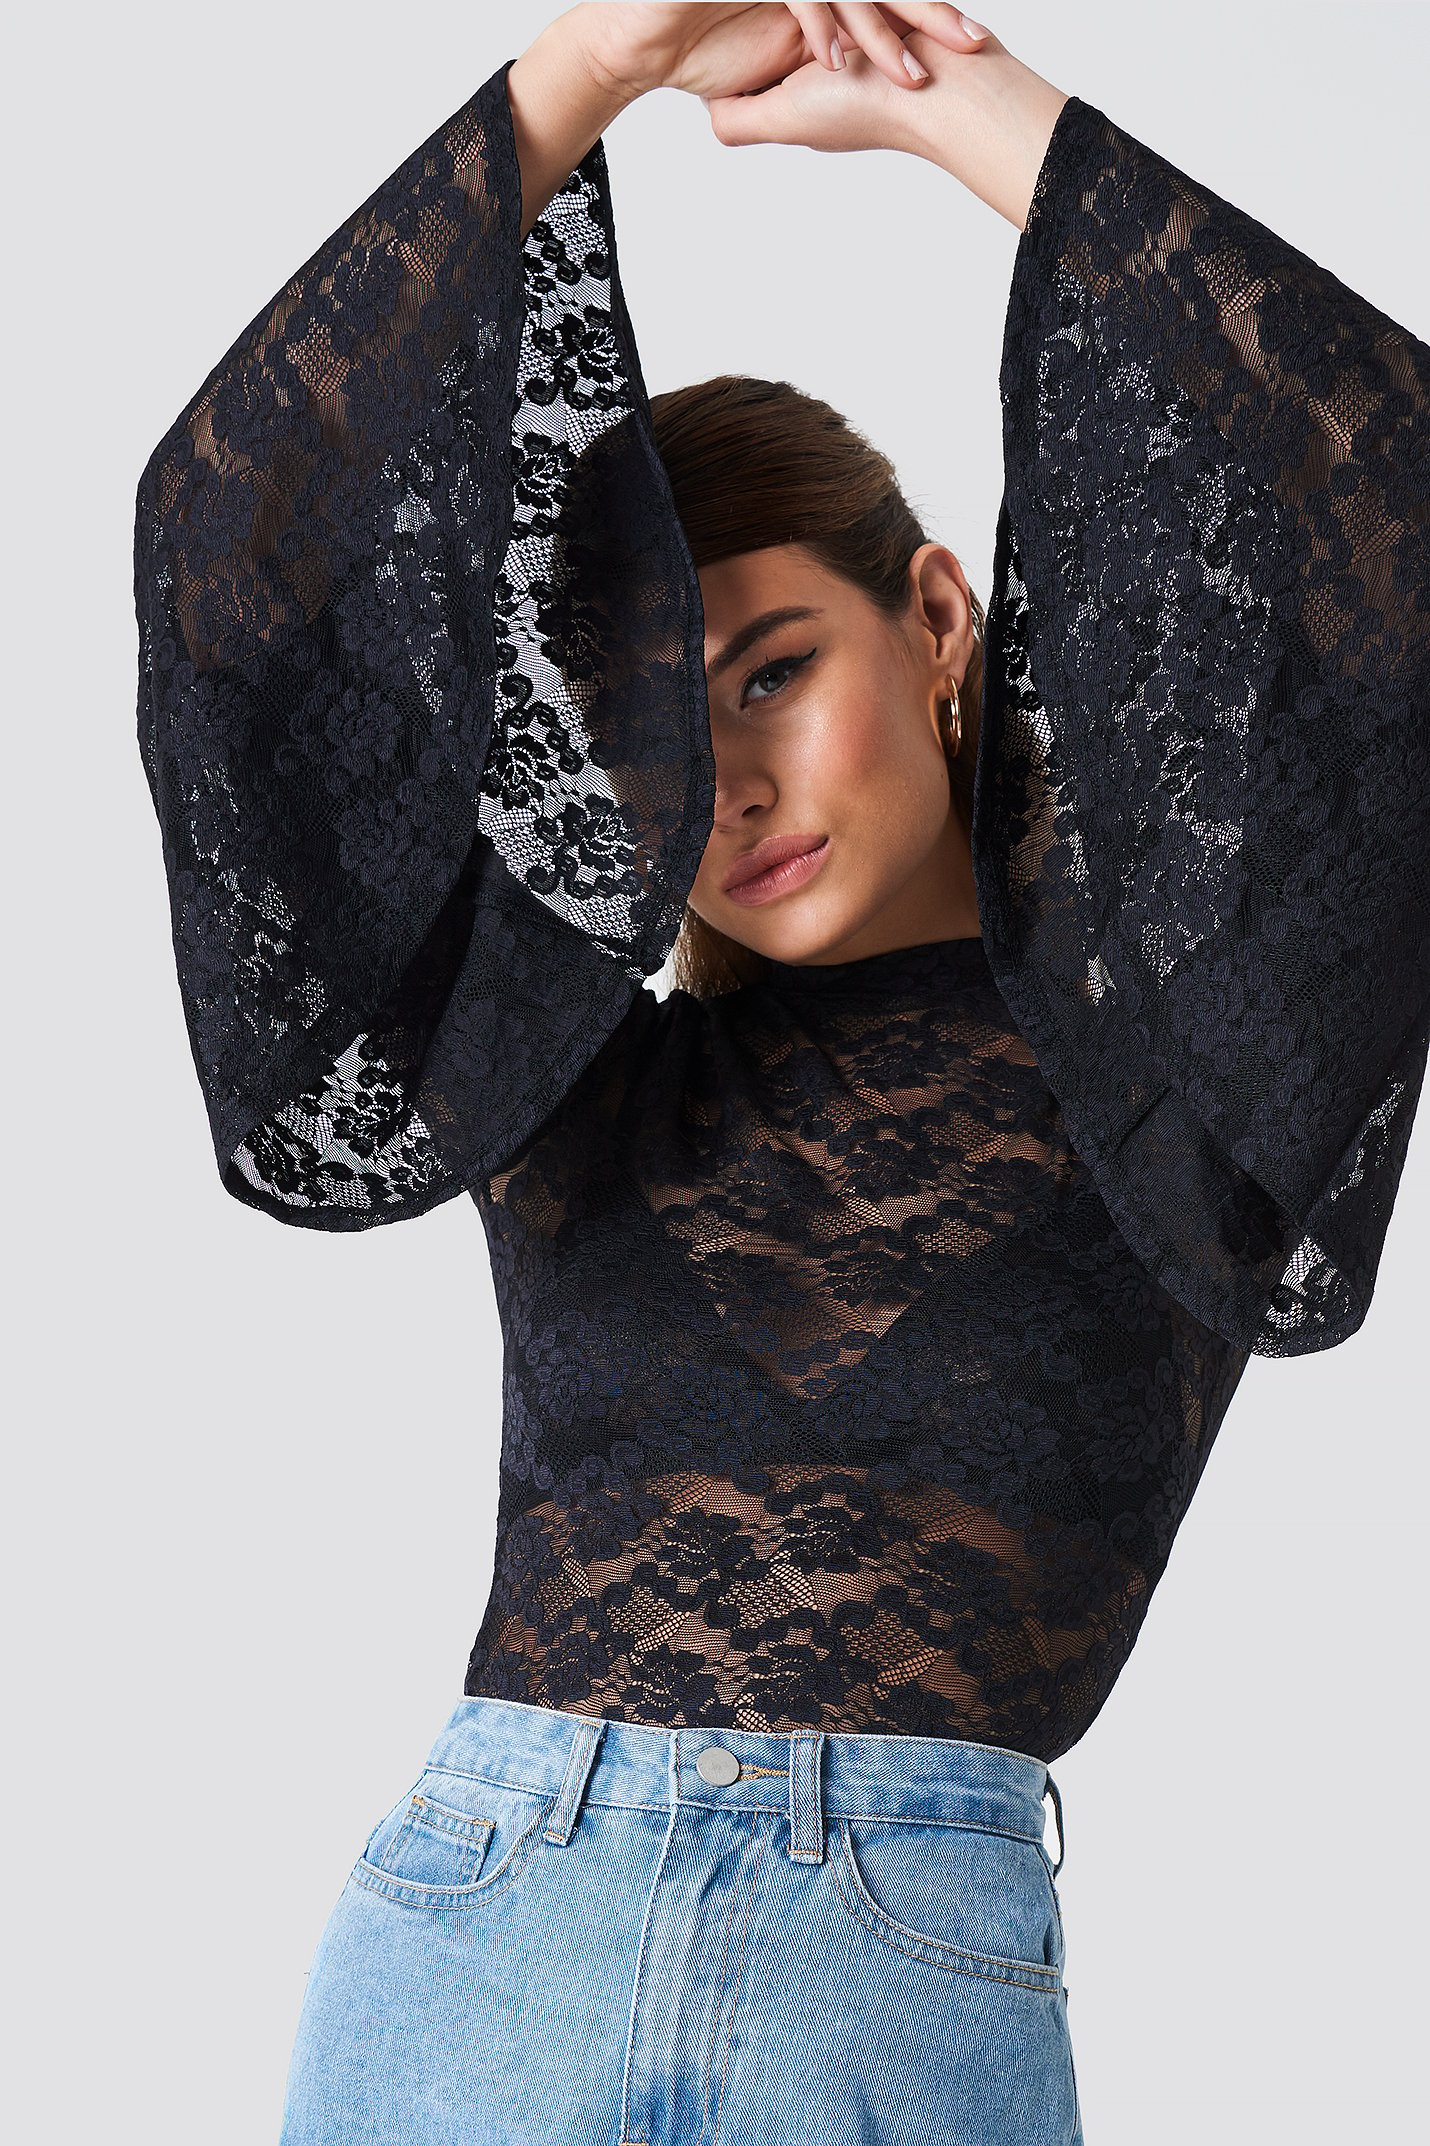 20 Trendy Lace Bell Sleeve Tops For Holiday Party Season